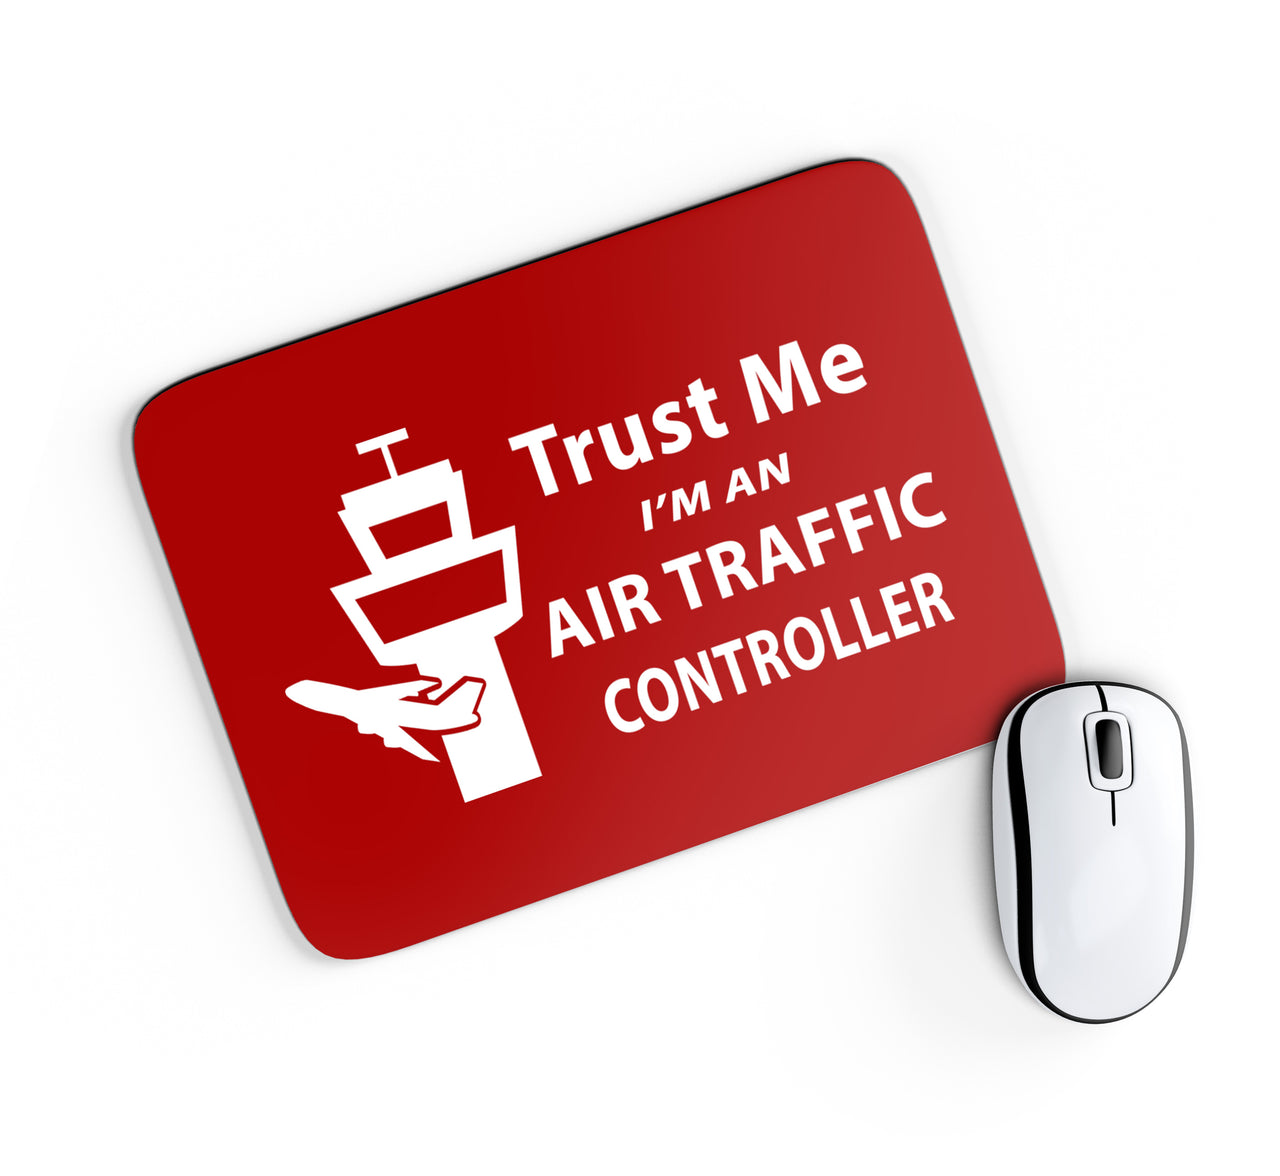 Trust Me I'm an Air Traffic Controller Designed Mouse Pads